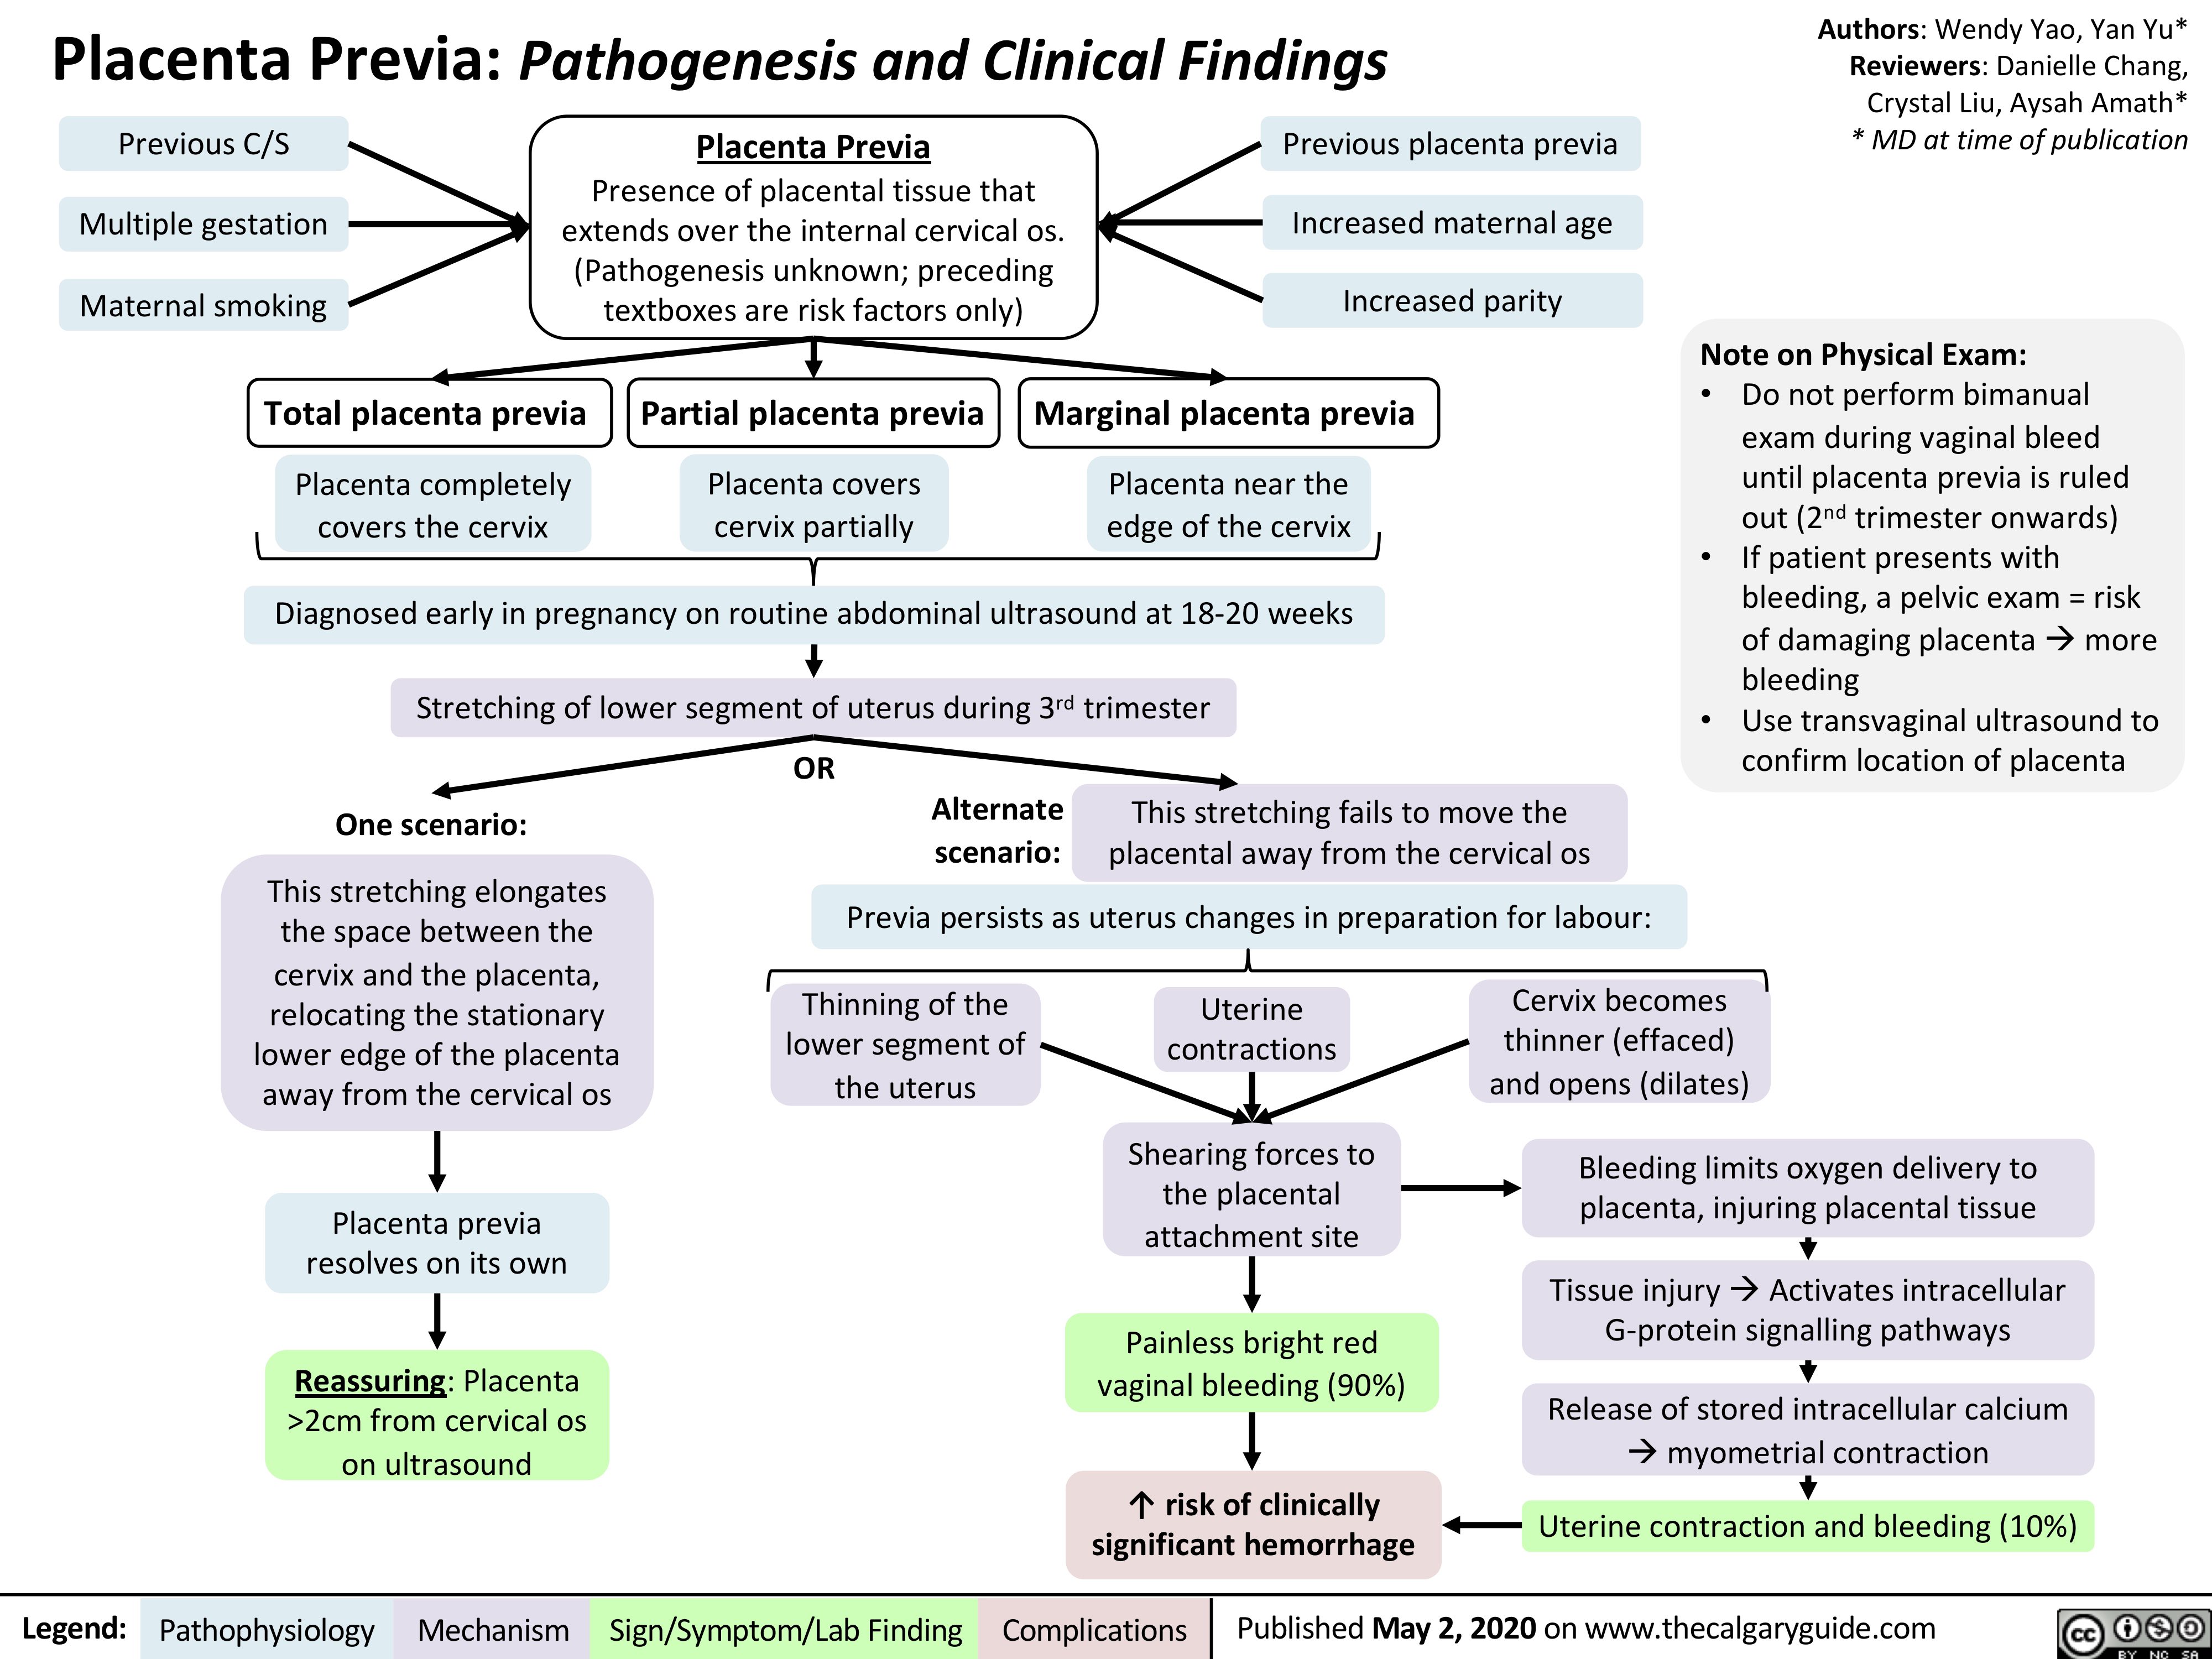 Placenta Previa: Pathogenesis and Clinical Findings
Authors: Wendy Yao, Yan Yu* Reviewers: Danielle Chang, Crystal Liu, Aysah Amath* * MD at time of publication
Note on Physical Exam:
• Do not perform bimanual exam during vaginal bleed until placenta previa is ruled out (2nd trimester onwards)
• If patient presents with bleeding, a pelvic exam = risk of damaging placentaàmore bleeding
• Use transvaginal ultrasound to confirm location of placenta
   Previous C/S Multiple gestation Maternal smoking
Placenta Previa
Presence of placental tissue that extends over the internal cervical os. (Pathogenesis unknown; preceding textboxes are risk factors only)
Previous placenta previa Increased maternal age Increased parity
            Total placenta previa
Placenta completely covers the cervix
Partial placenta previa
Placenta covers cervix partially
Marginal placenta previa
Placenta near the edge of the cervix
     Diagnosed early in pregnancy on routine abdominal ultrasound at 18-20 weeks Stretching of lower segment of uterus during 3rd trimester
    OR
Alternate scenario:
 One scenario:
This stretching elongates the space between the cervix and the placenta, relocating the stationary lower edge of the placenta away from the cervical os
Placenta previa resolves on its own
Reassuring: Placenta >2cm from cervical os on ultrasound
This stretching fails to move the placental away from the cervical os
  Previa persists as uterus changes in preparation for labour:
  Thinning of the lower segment of the uterus
Uterine contractions
Shearing forces to the placental attachment site
Painless bright red vaginal bleeding (90%)
↑ risk of clinically significant hemorrhage
Cervix becomes thinner (effaced) and opens (dilates)
Bleeding limits oxygen delivery to placenta, injuring placental tissue
Tissue injuryàActivates intracellular G-protein signalling pathways
Release of stored intracellular calcium àmyometrial contraction
Uterine contraction and bleeding (10%)
                       Legend:
 Pathophysiology
Mechanism
Sign/Symptom/Lab Finding
  Complications
Published May 2, 2020 on www.thecalgaryguide.com
    